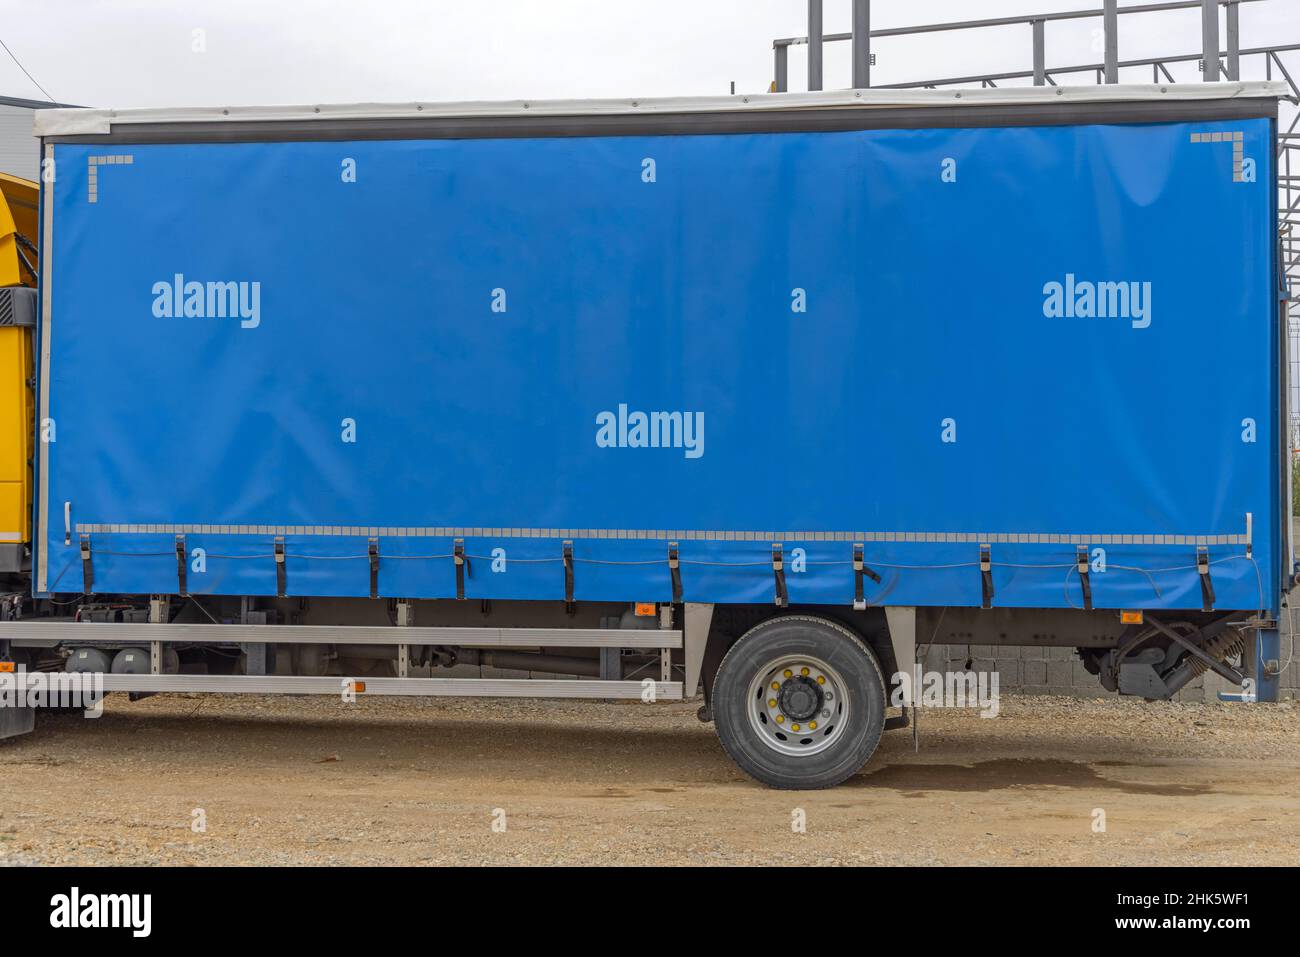 Truck Side Blue Curtains Curtainsider Lorry Logistics Stock Photo